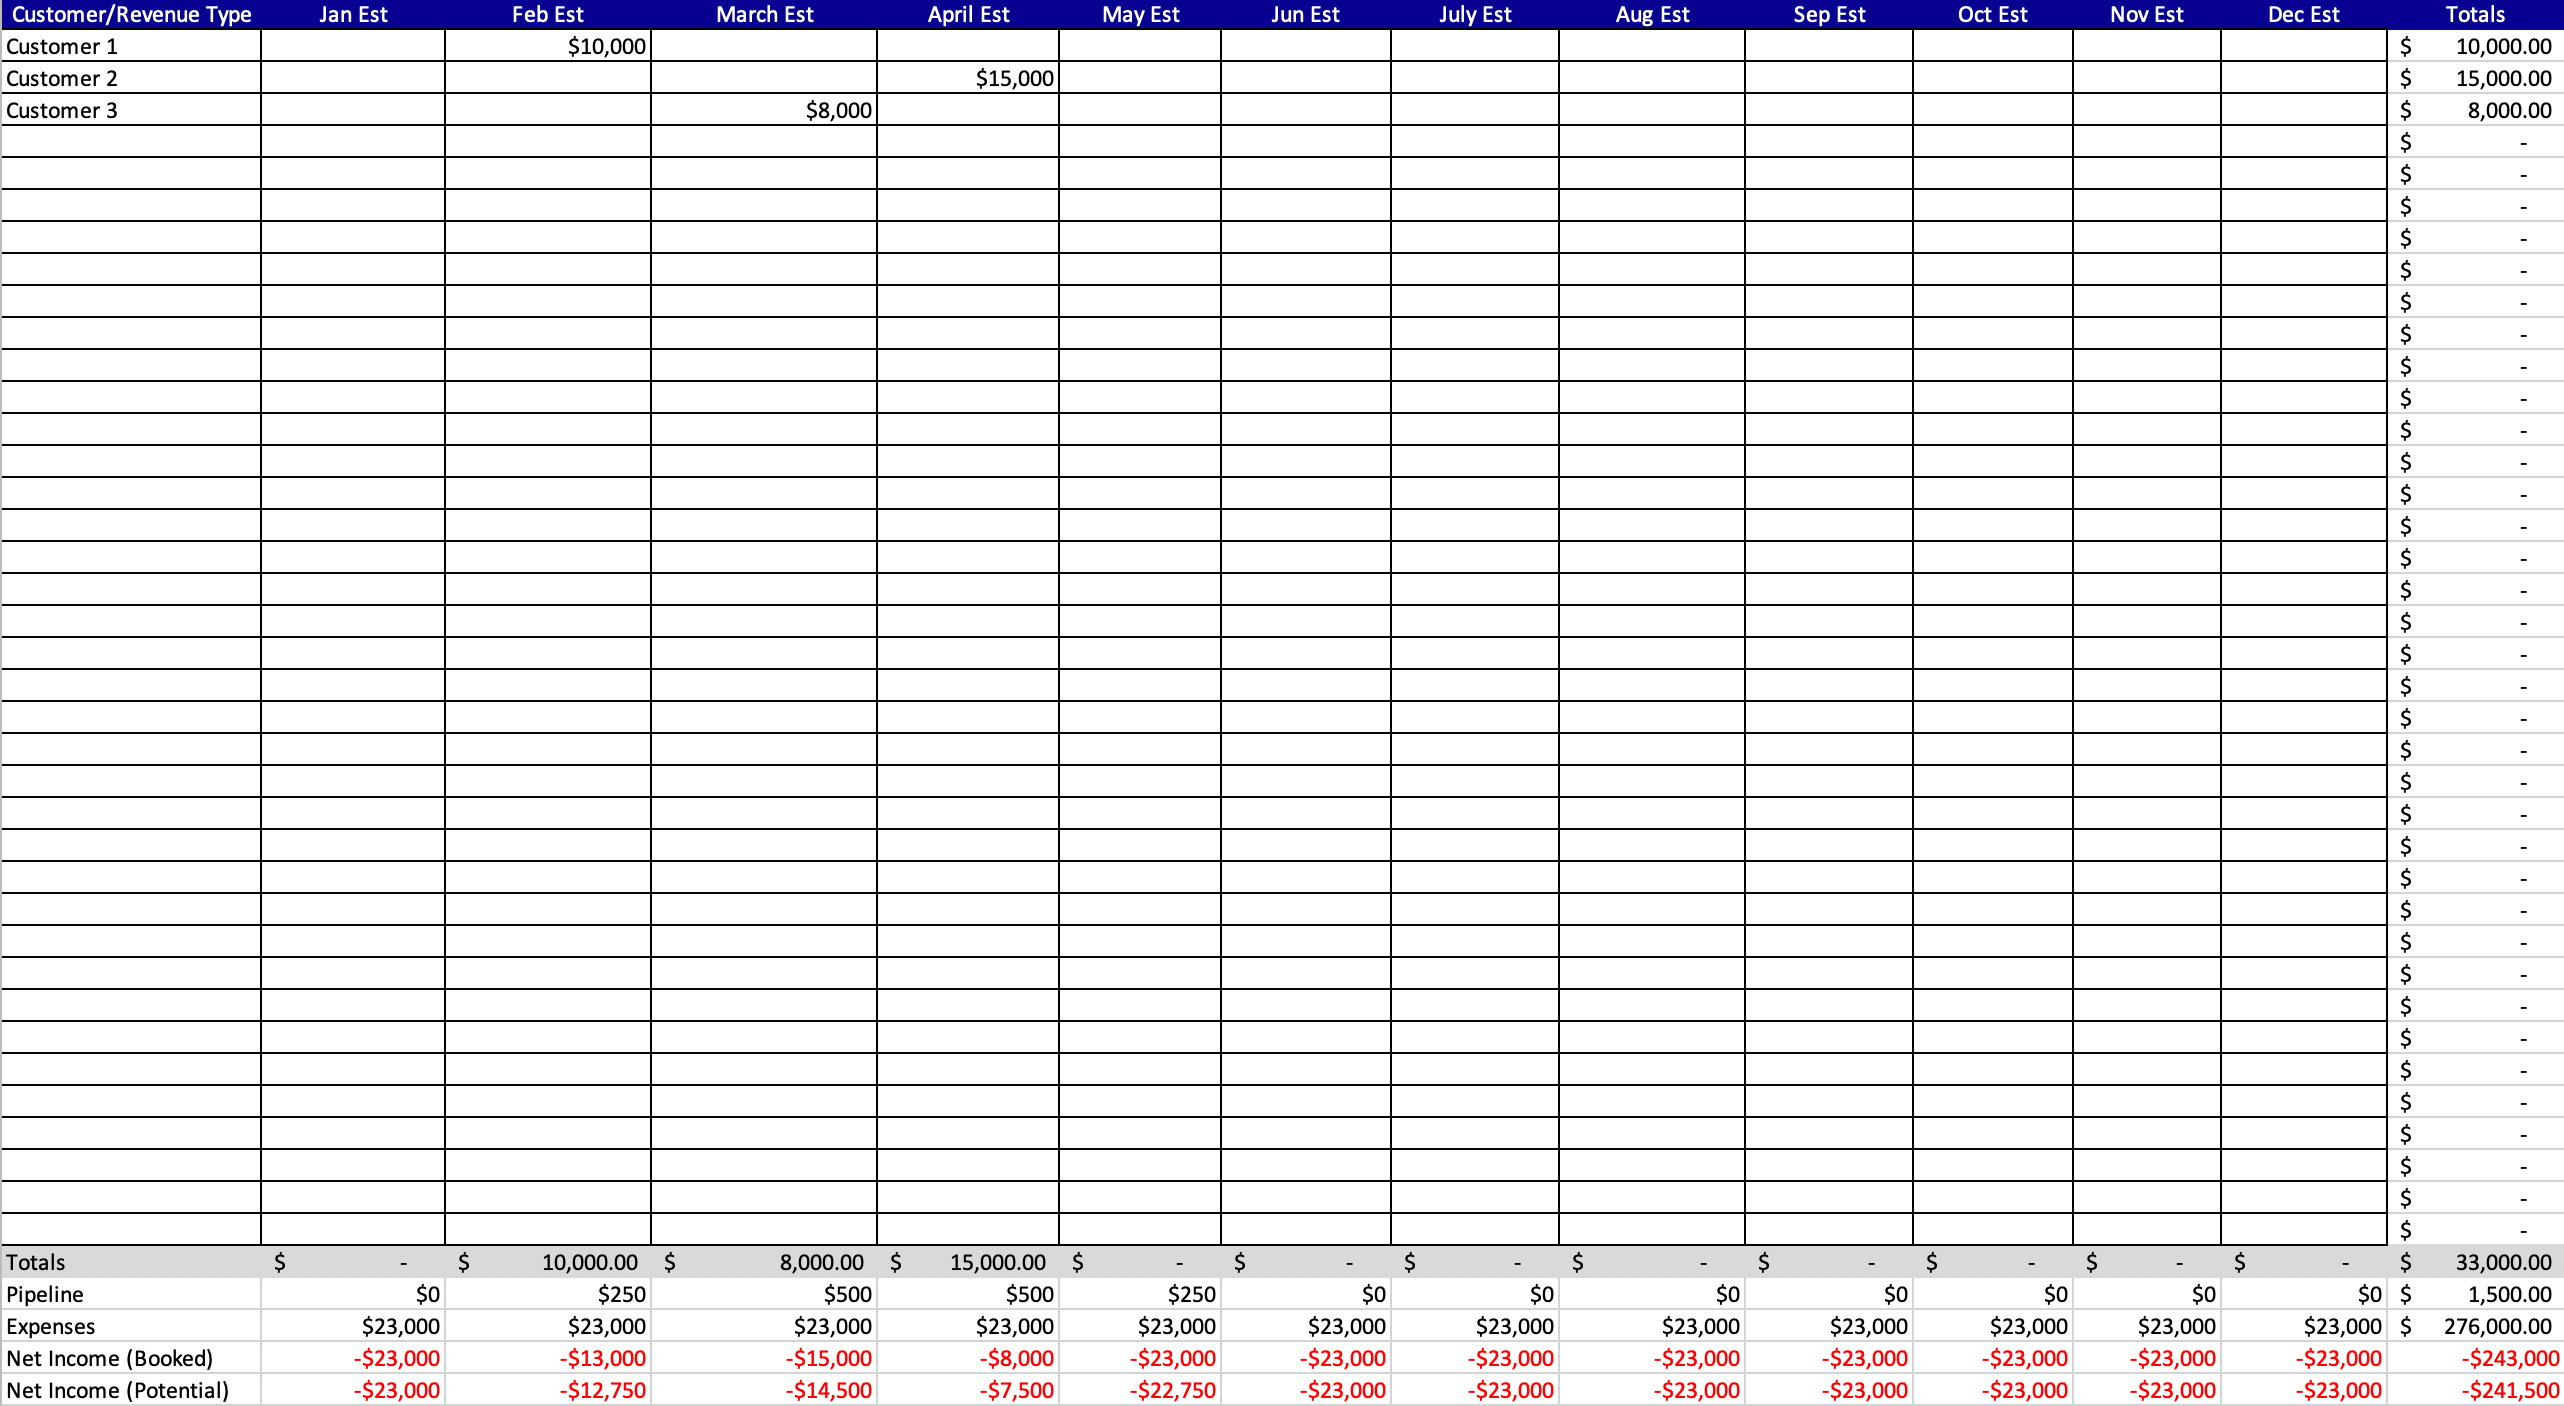 Preview of excel document for business income projection.